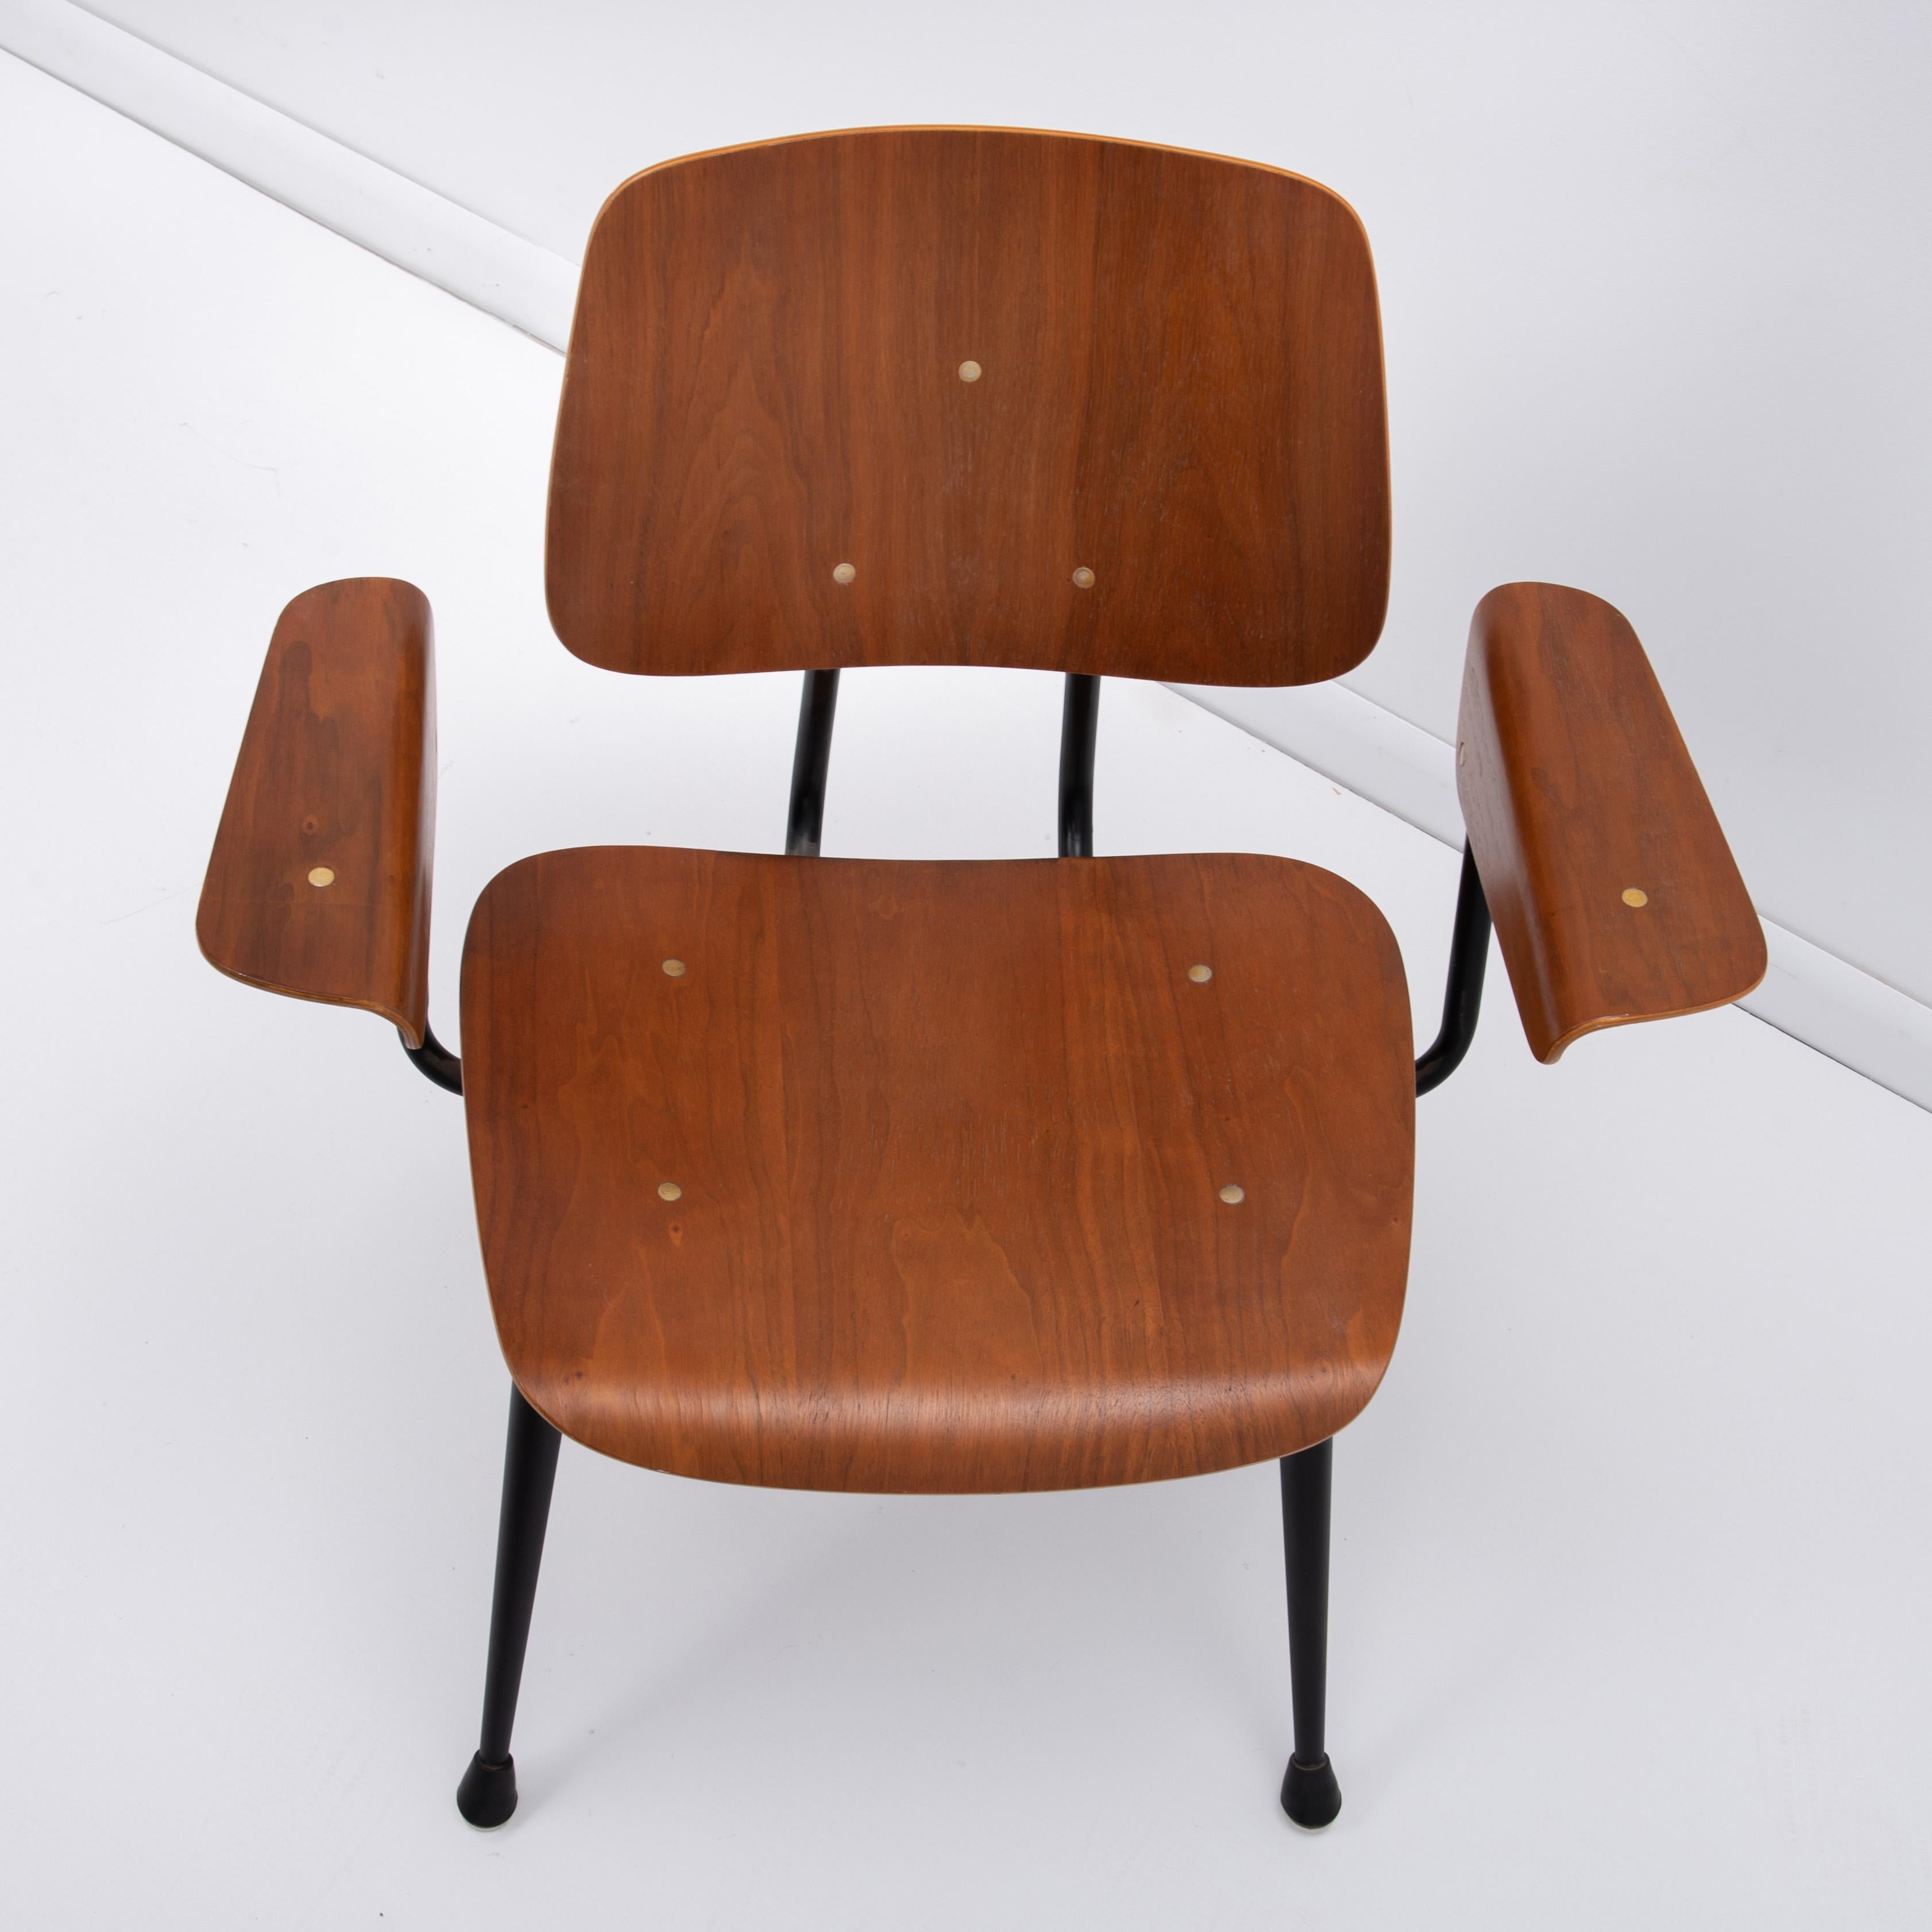 Walnut Brunswick Walnut Plywood Armchairs Eames DCW Jean Prouve - a Set of 4 For Sale 3